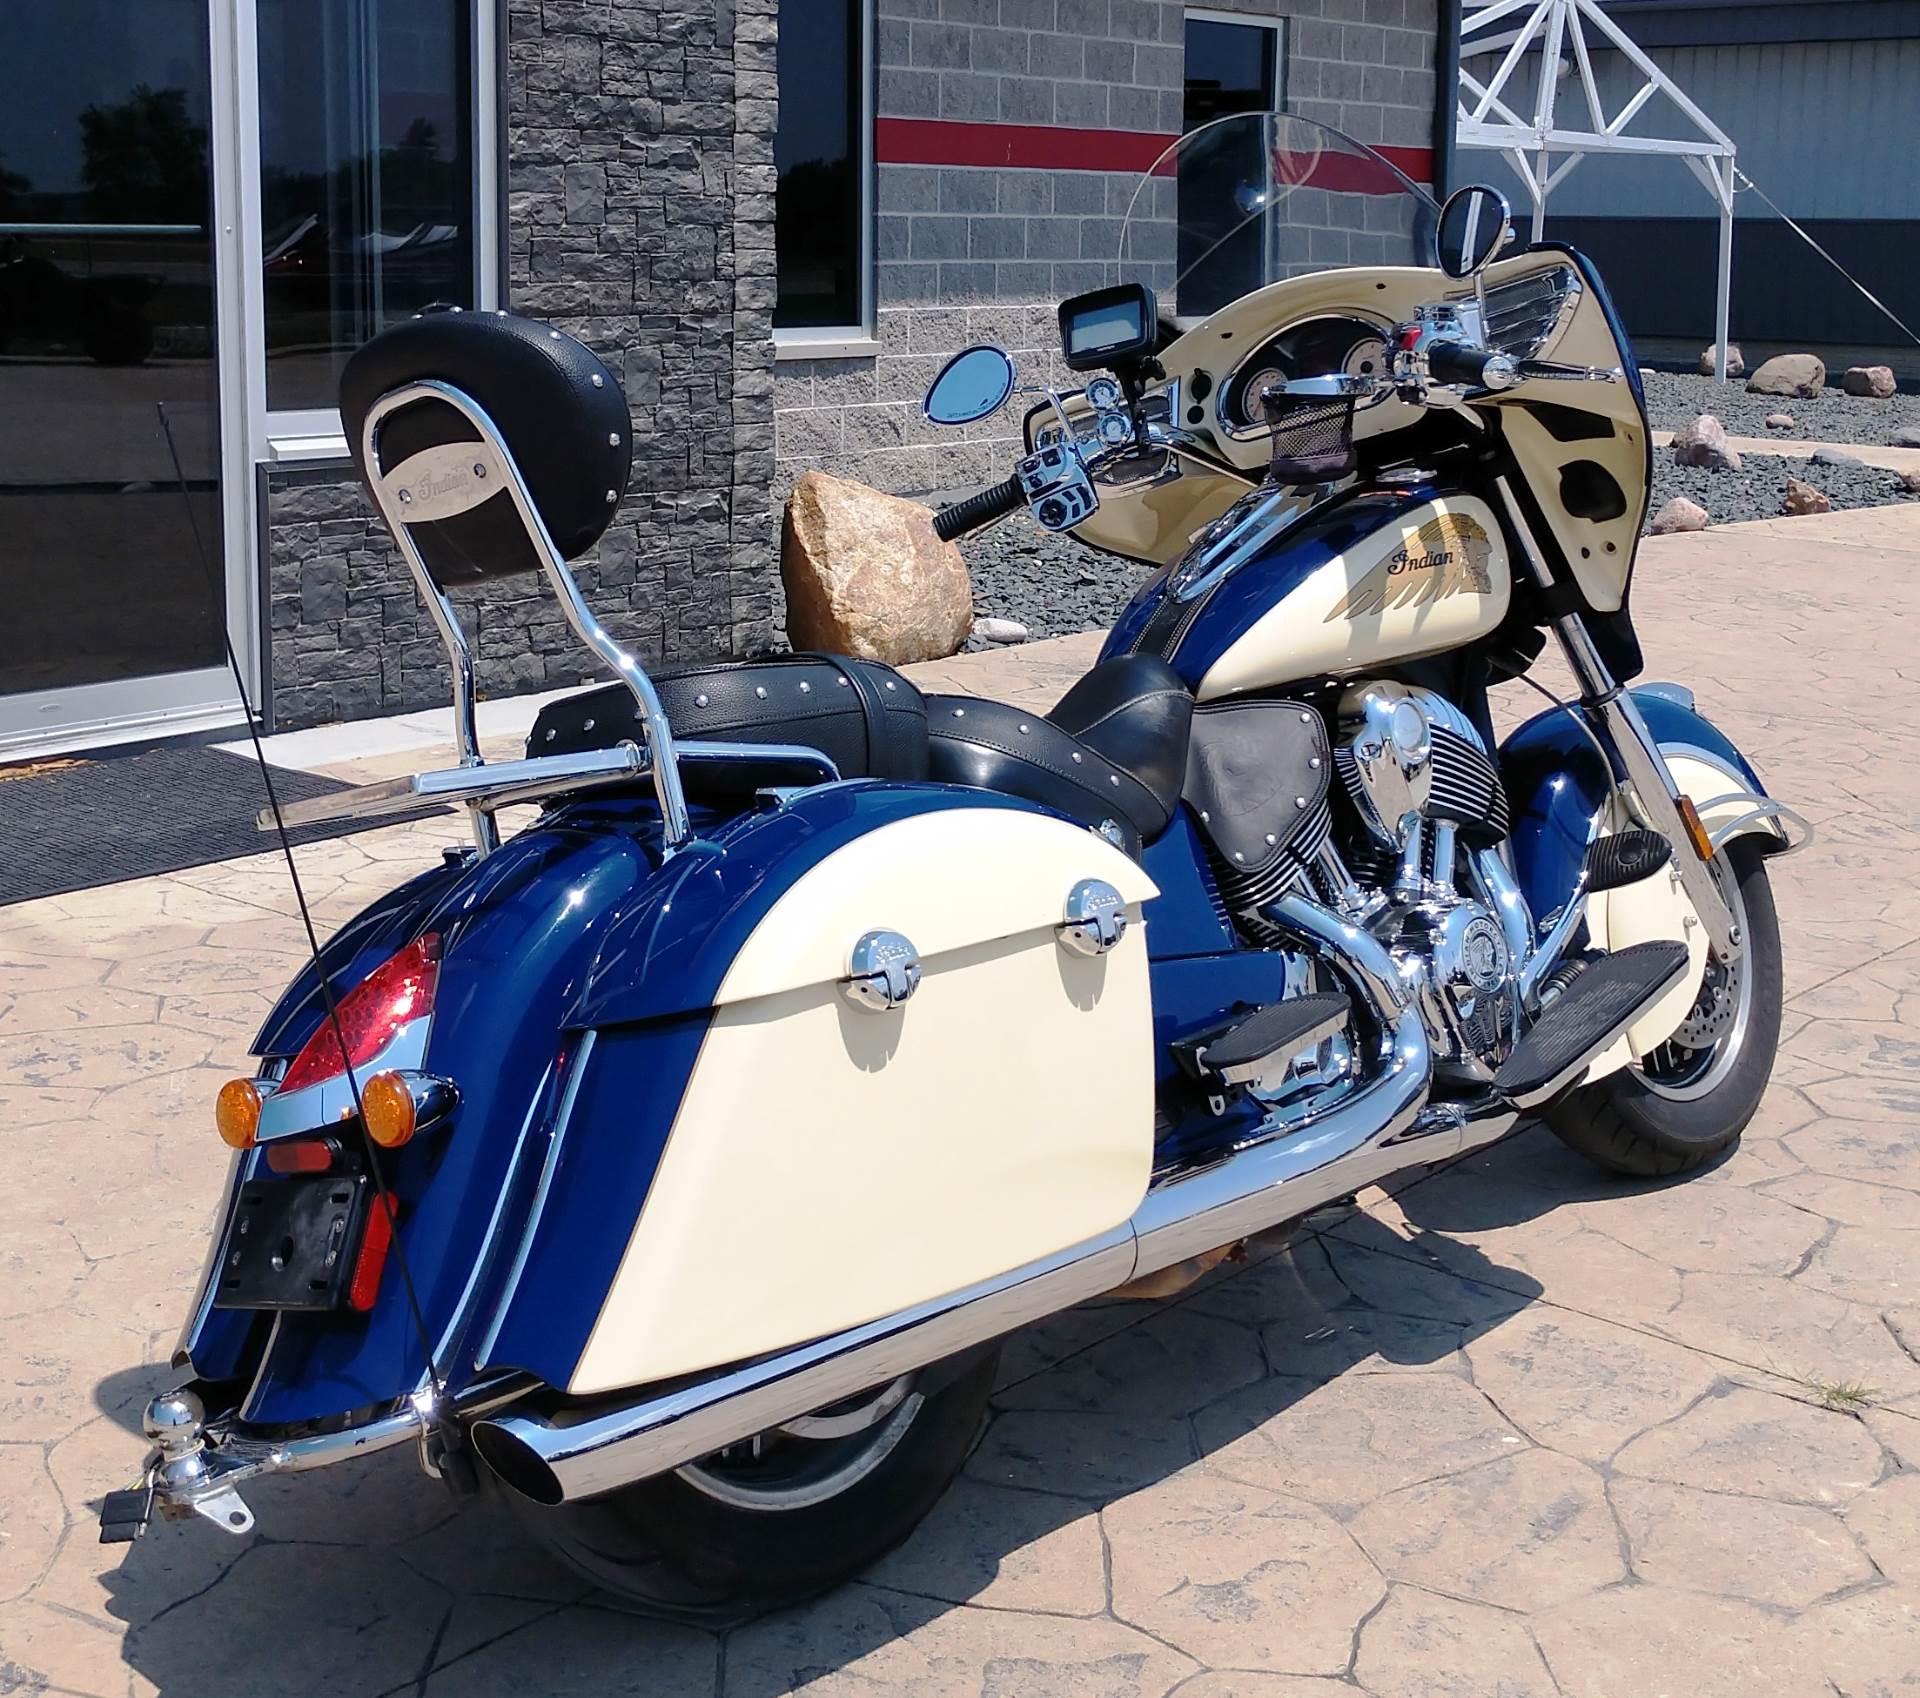 Used 2015 Indian Chieftain® Motorcycles in Ottumwa, IA ...